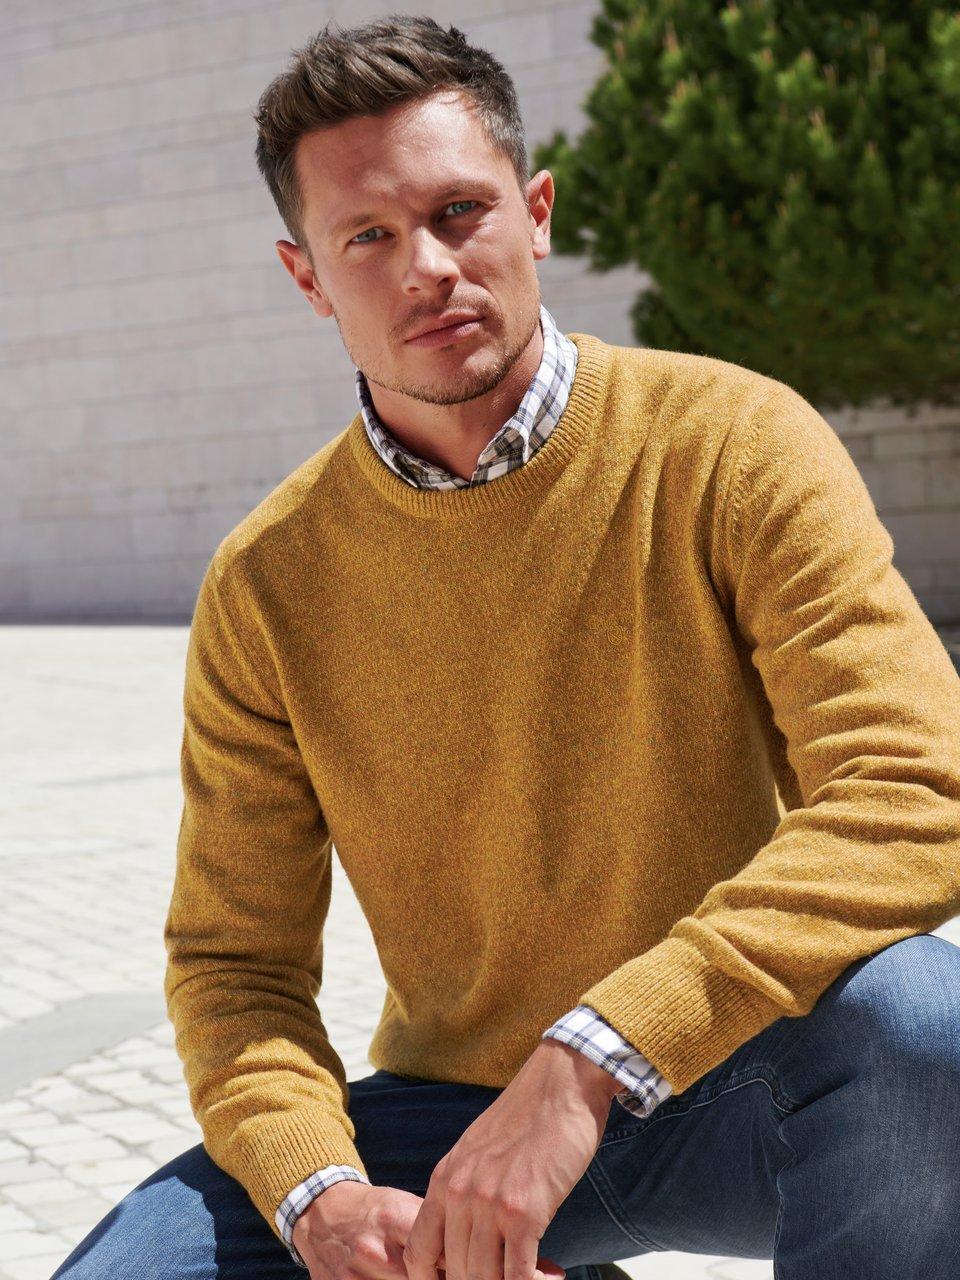 Barbour - Le pull style masculin